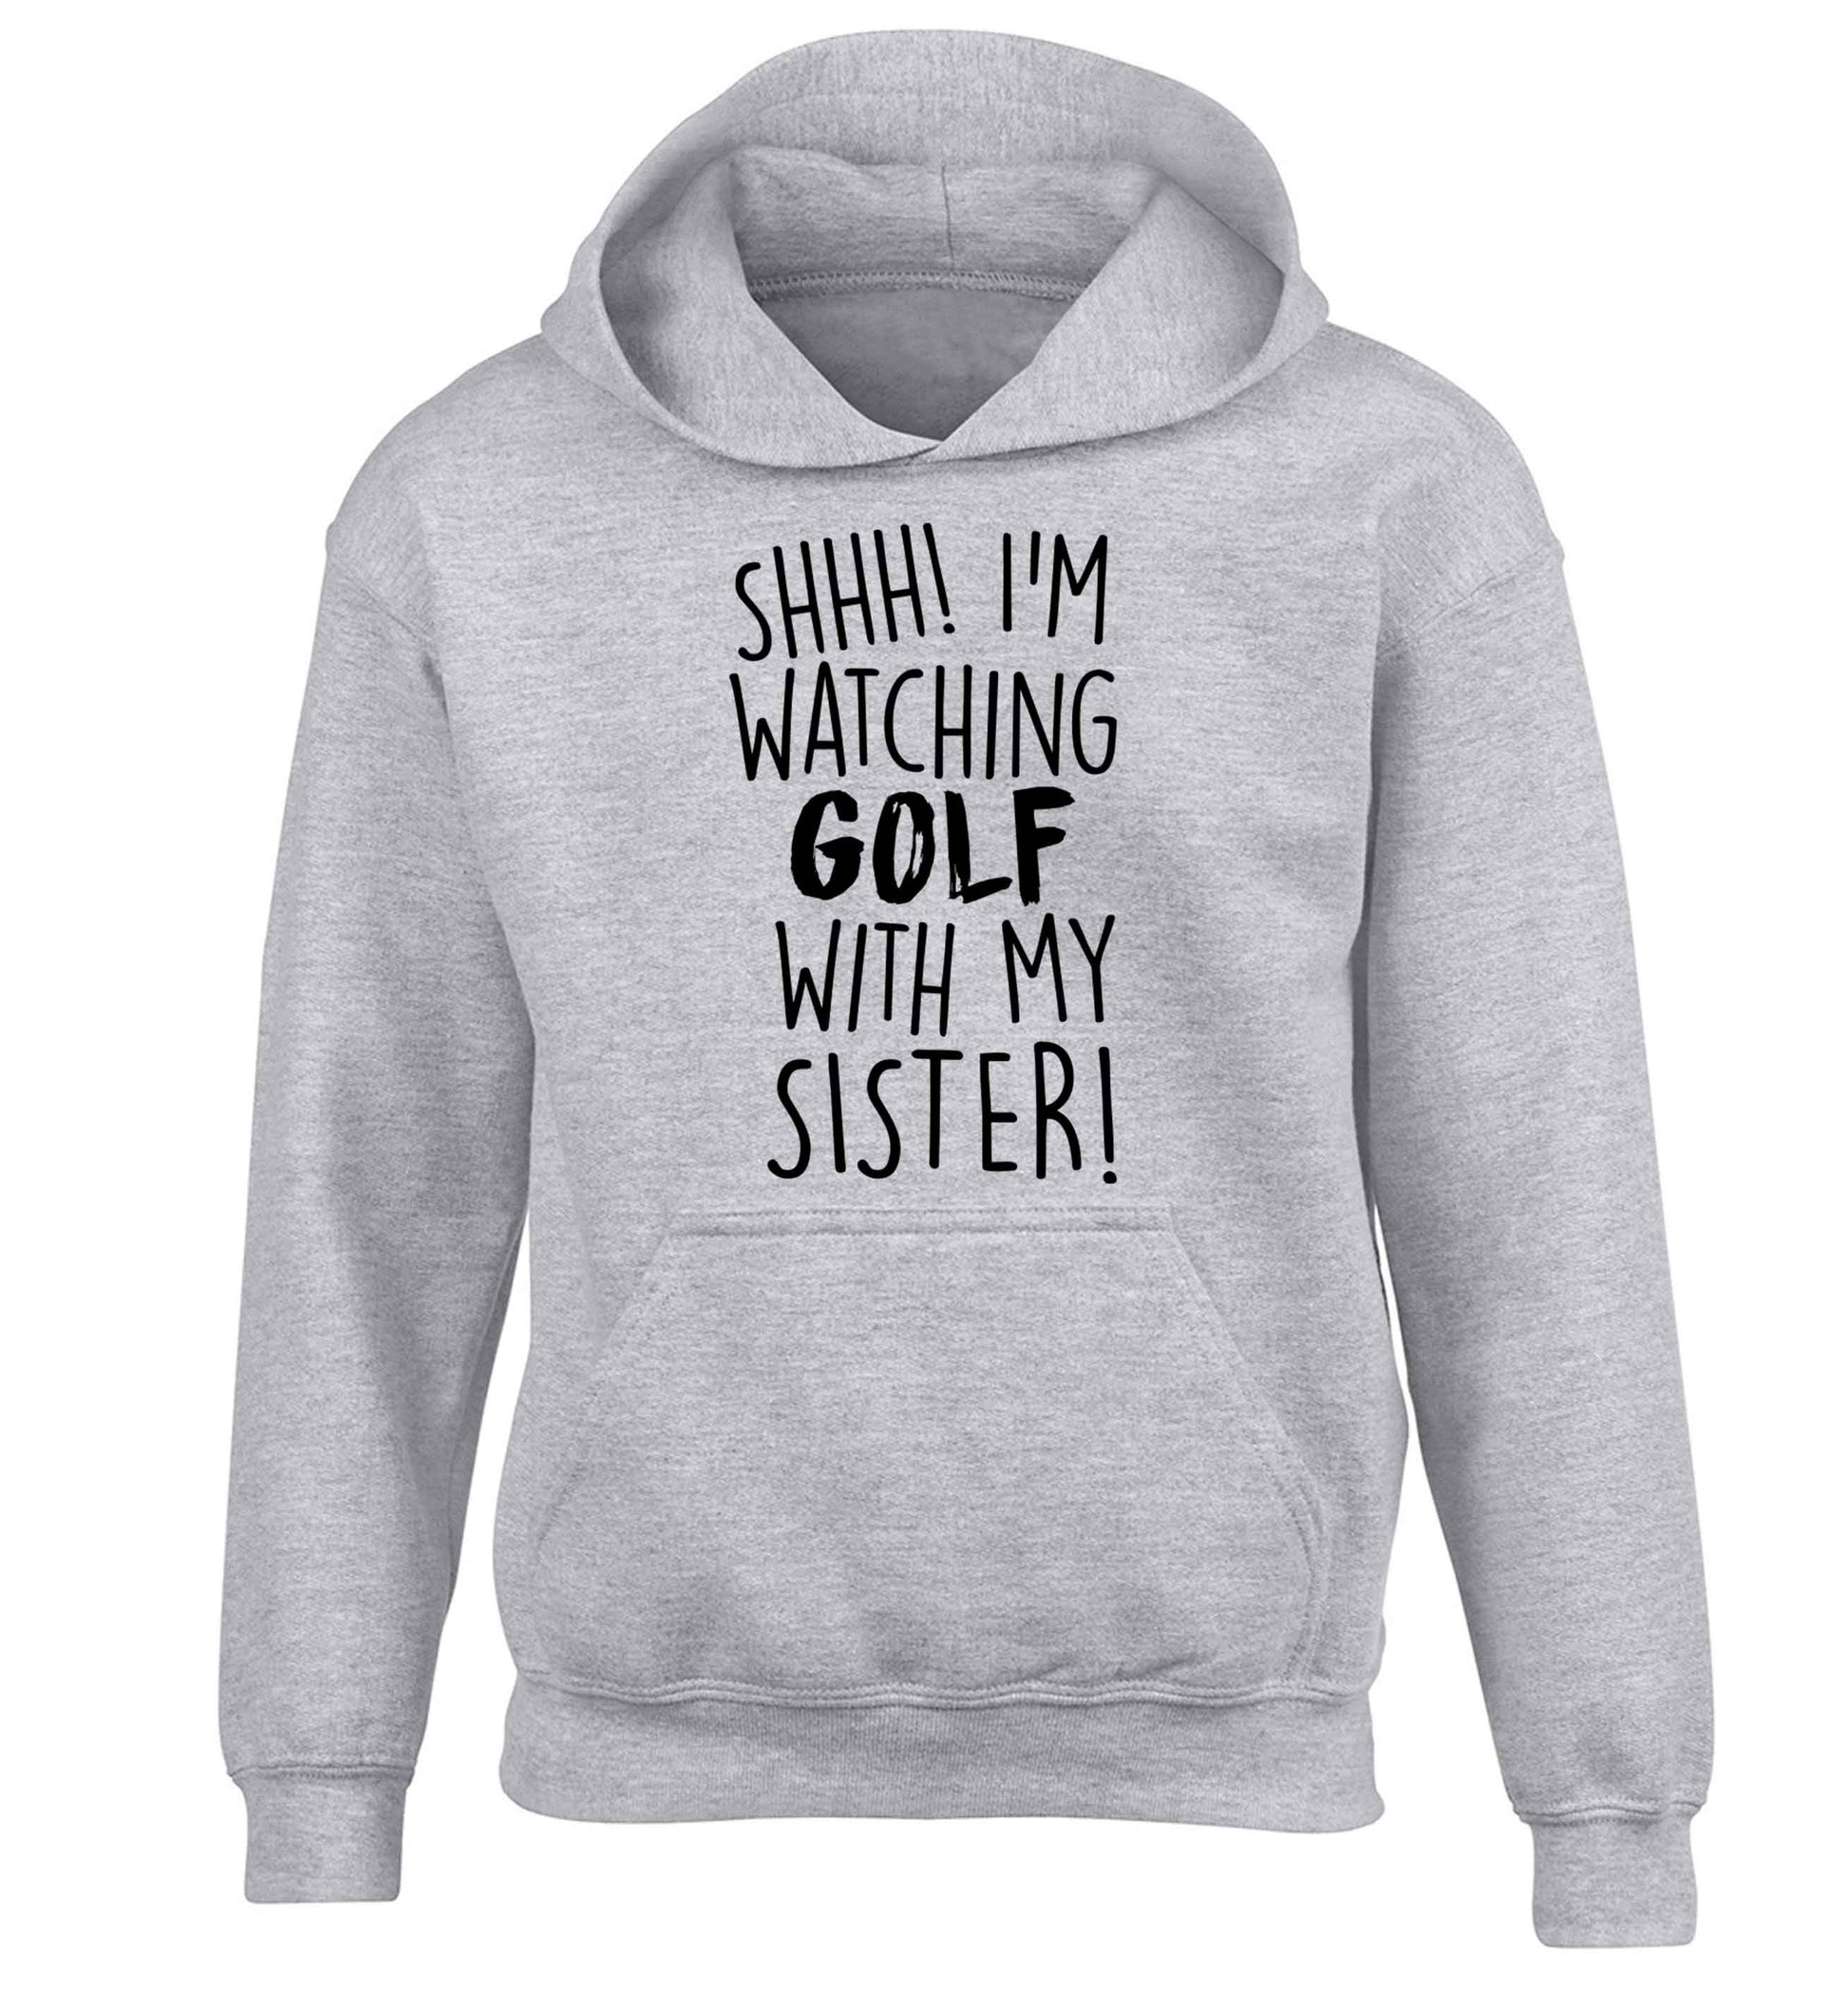 Shh I'm watching golf with my sister children's grey hoodie 12-13 Years